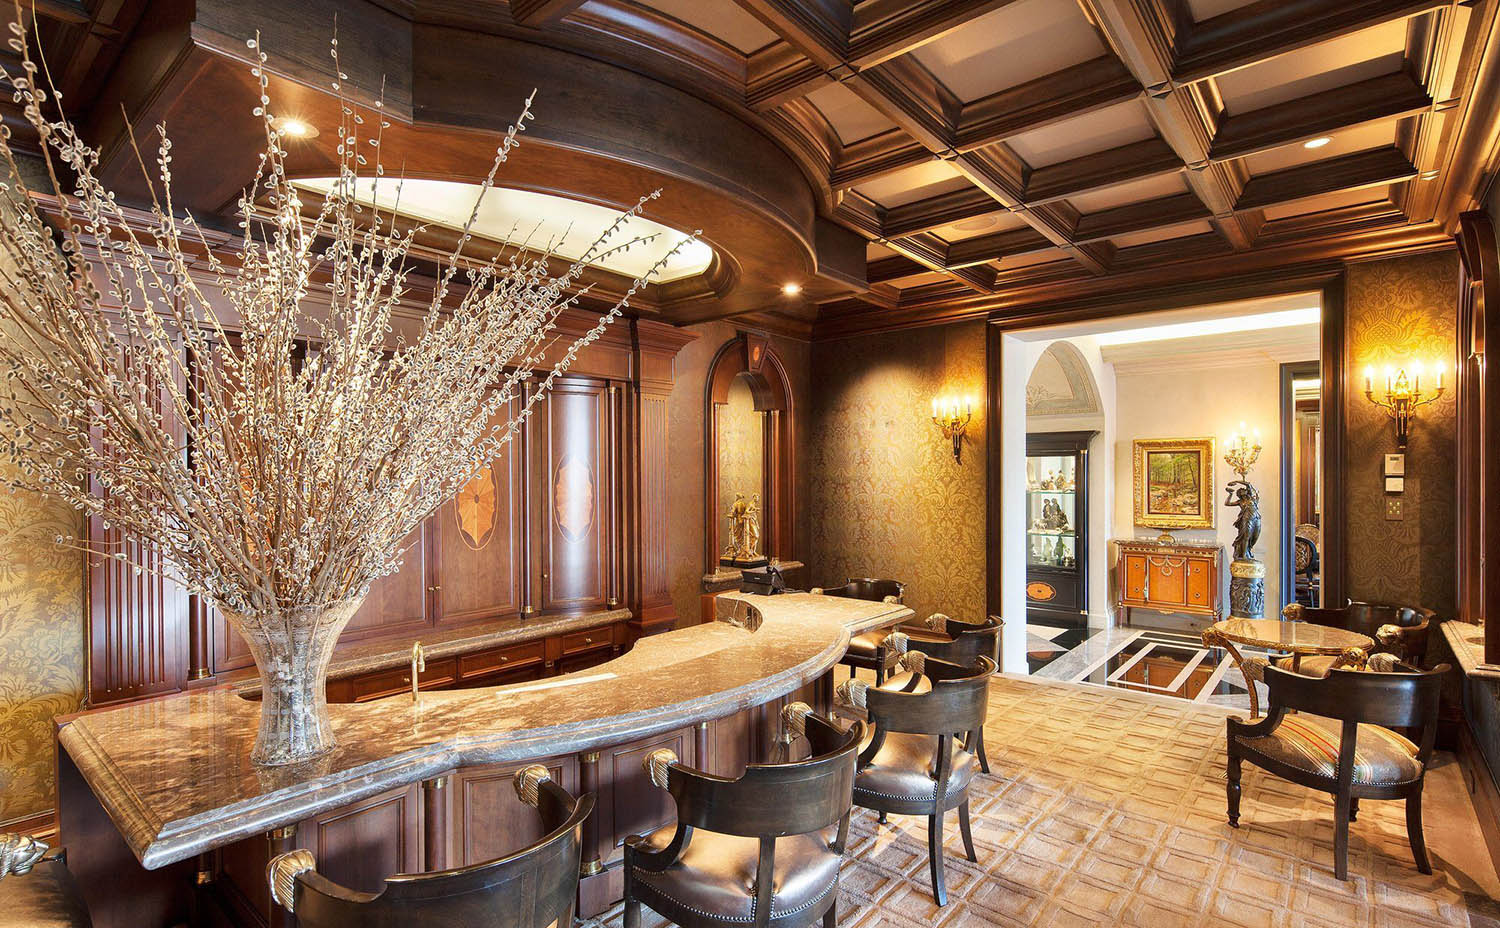 Wood wall paneling with wallpaper and coffered ceiling. Carpets. Medium brown stain. Bar with granite top.